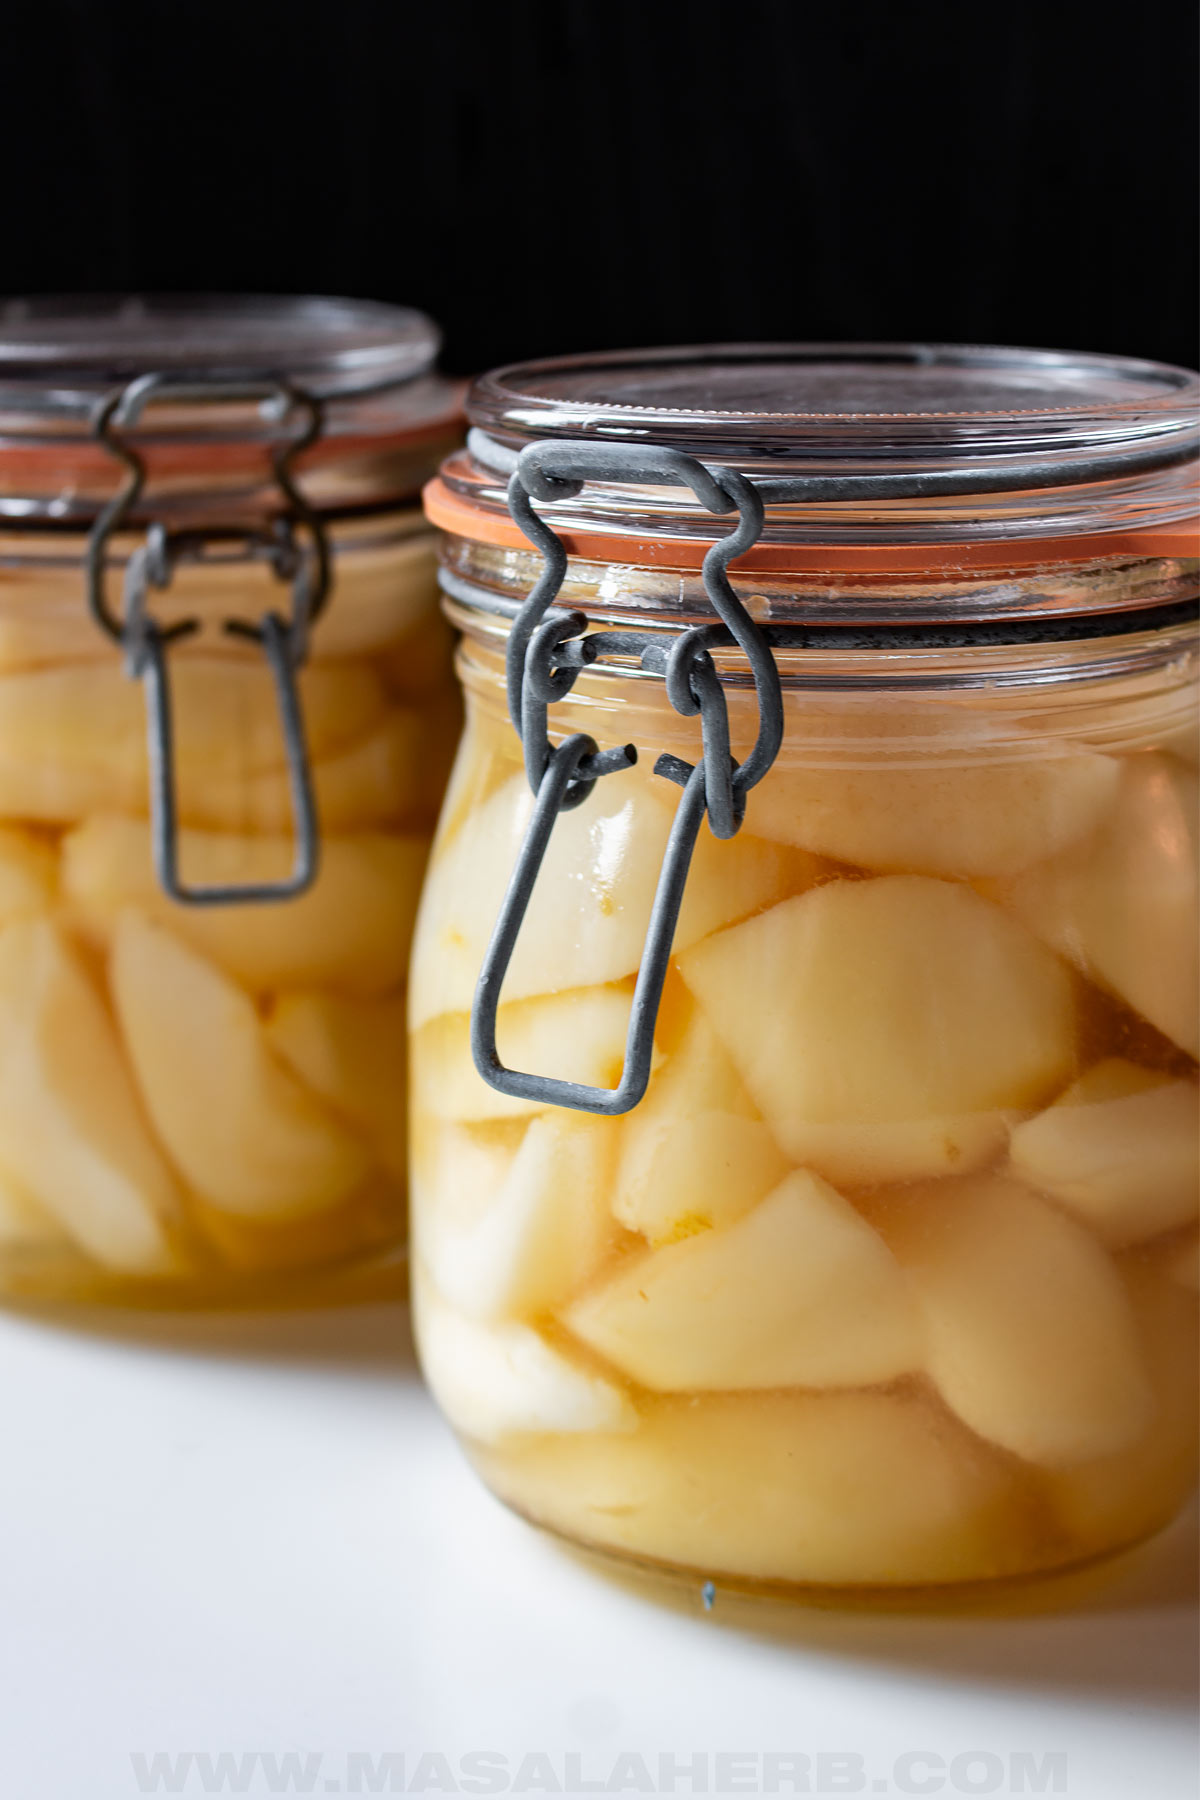 pears canned in jars